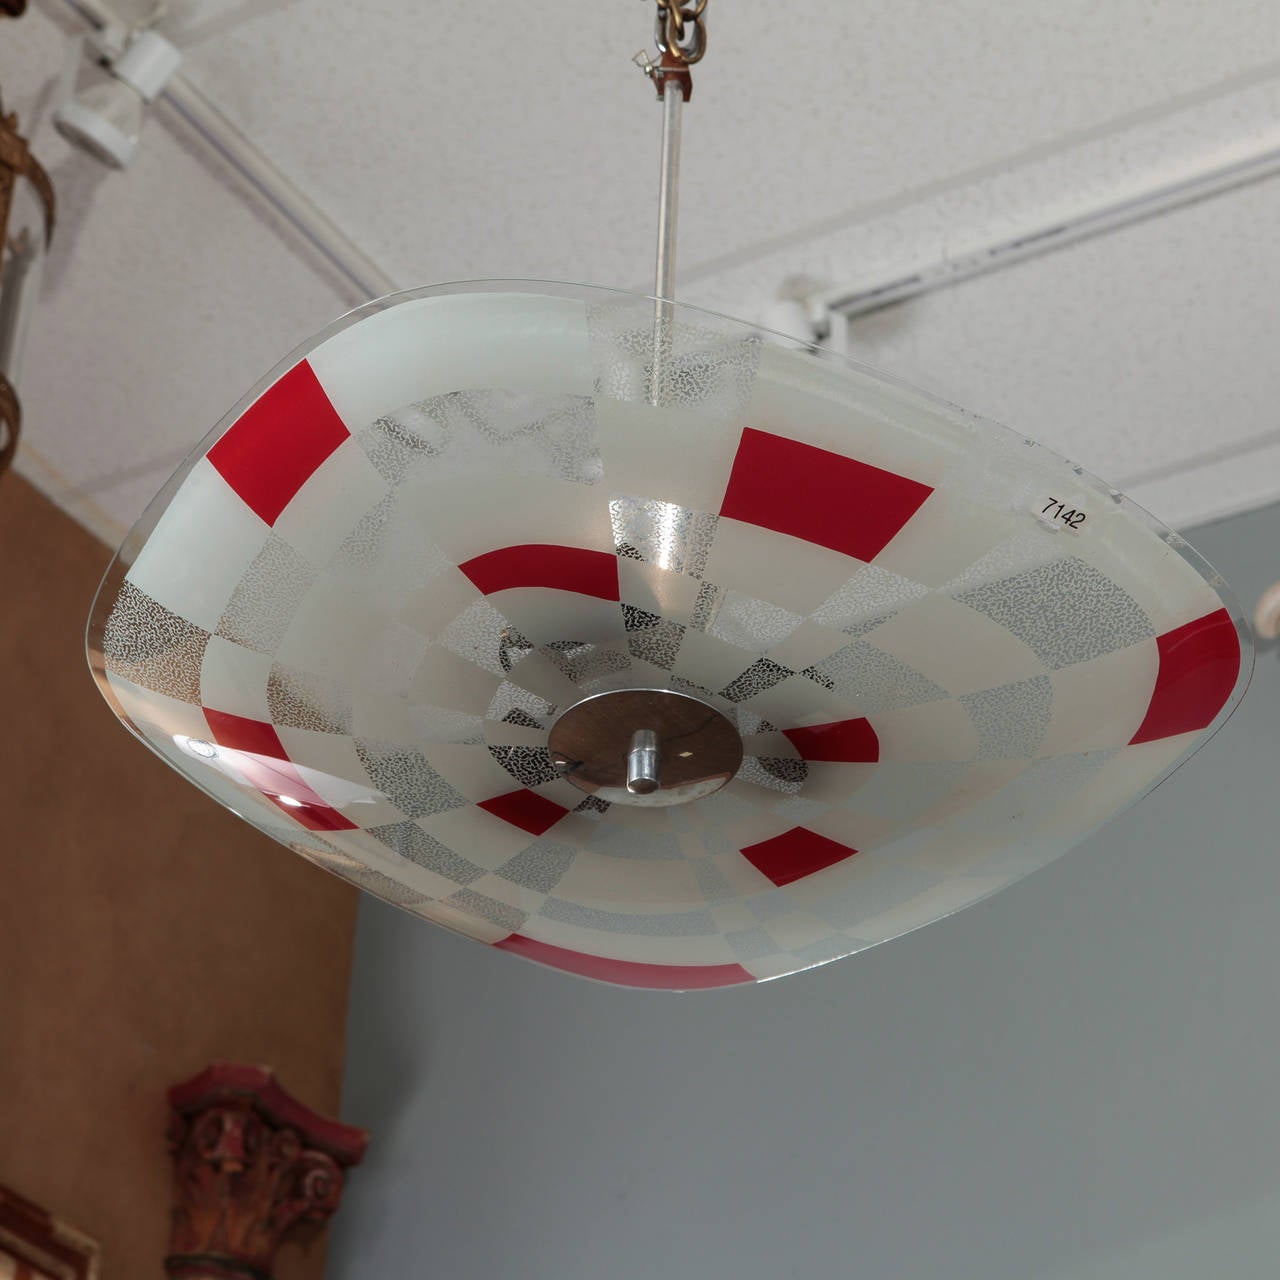 European Op Art ceiling fixture (we believe this is German) with geometric pattern in clear, white satin and red glass with silver tone metal hardware, circa late 1970s-early 1980s. New wiring for US electrical standards.
# of sockets: